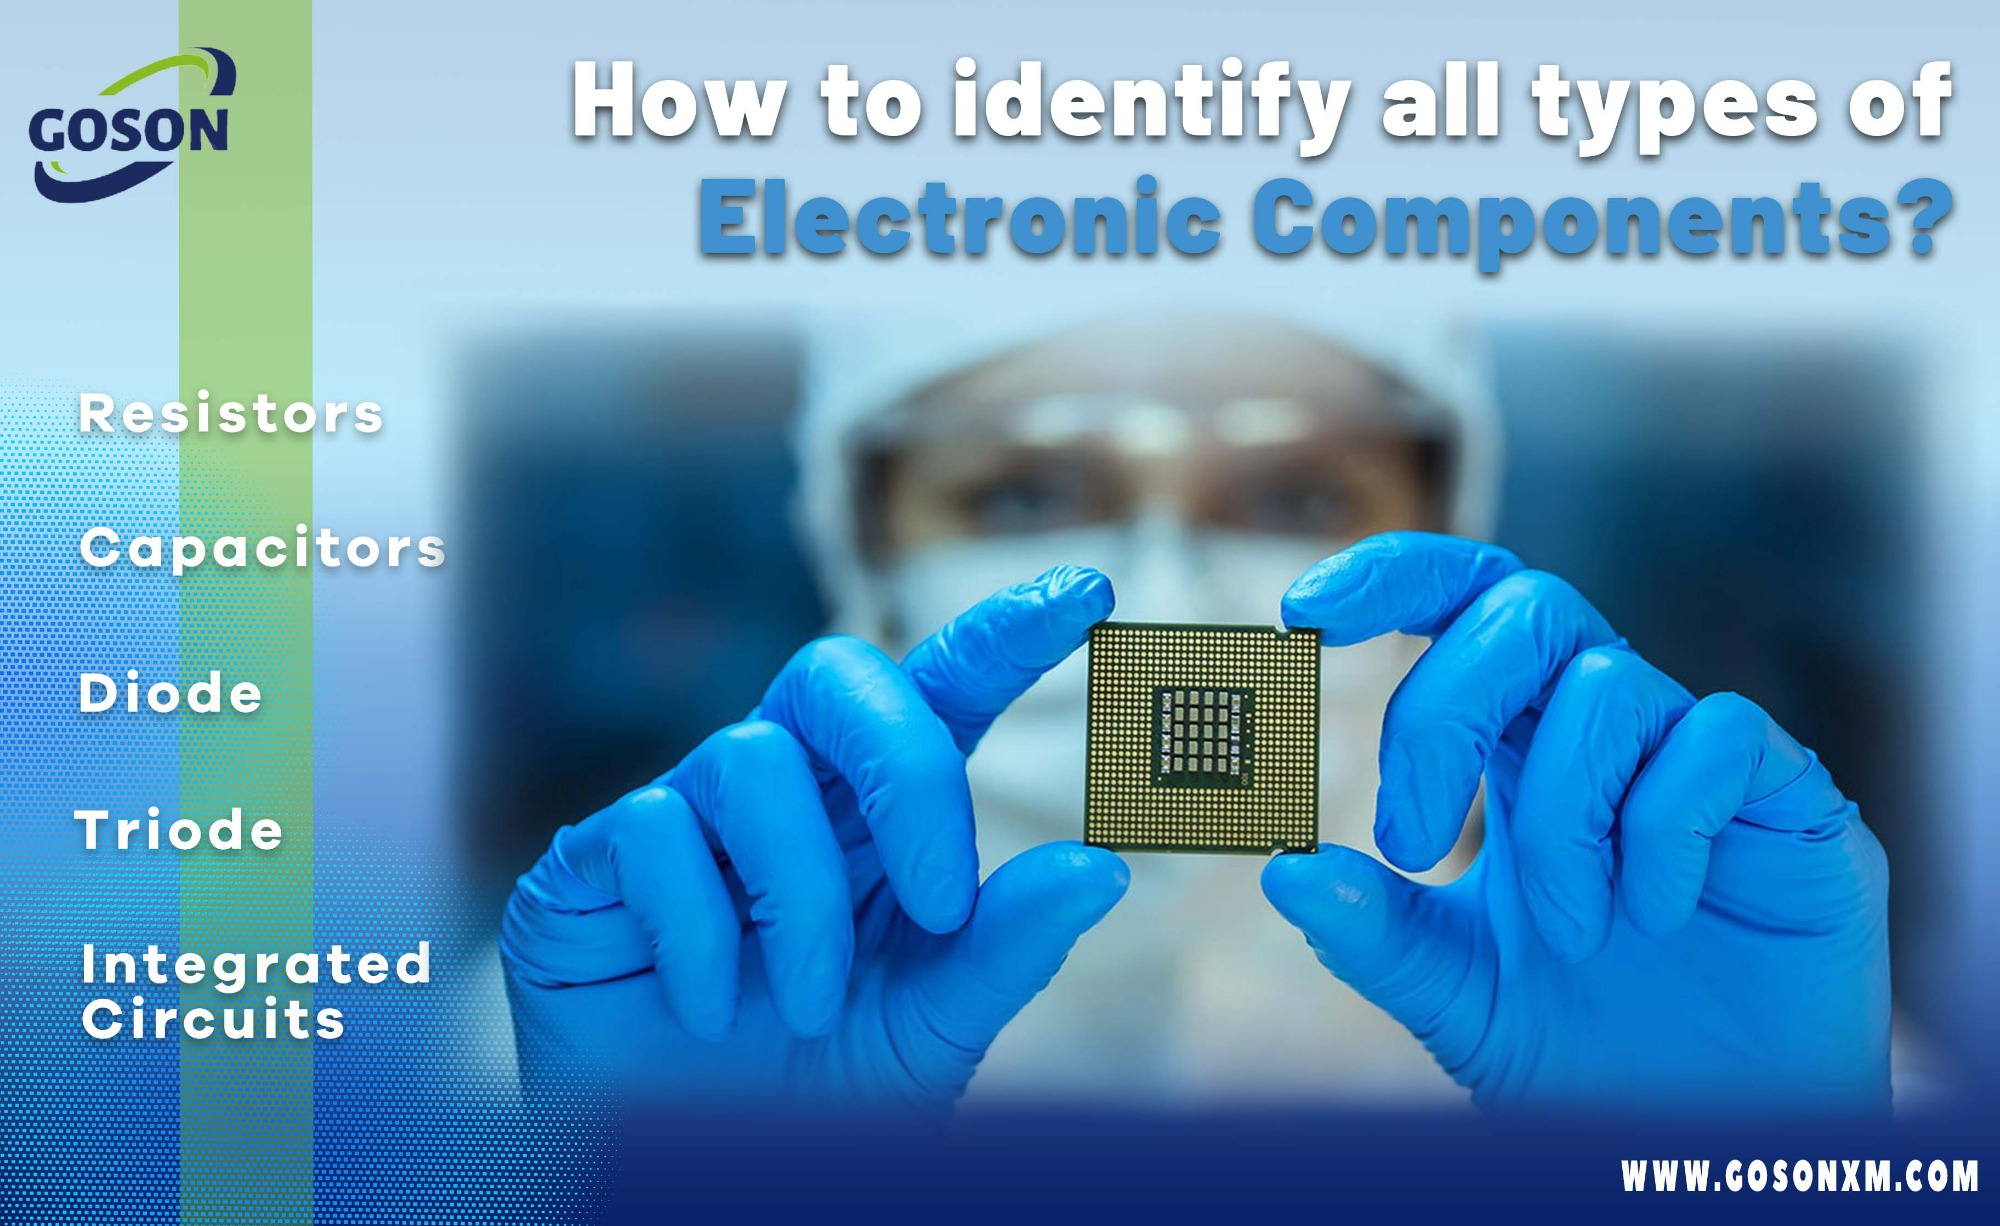 How to identify electronic components?